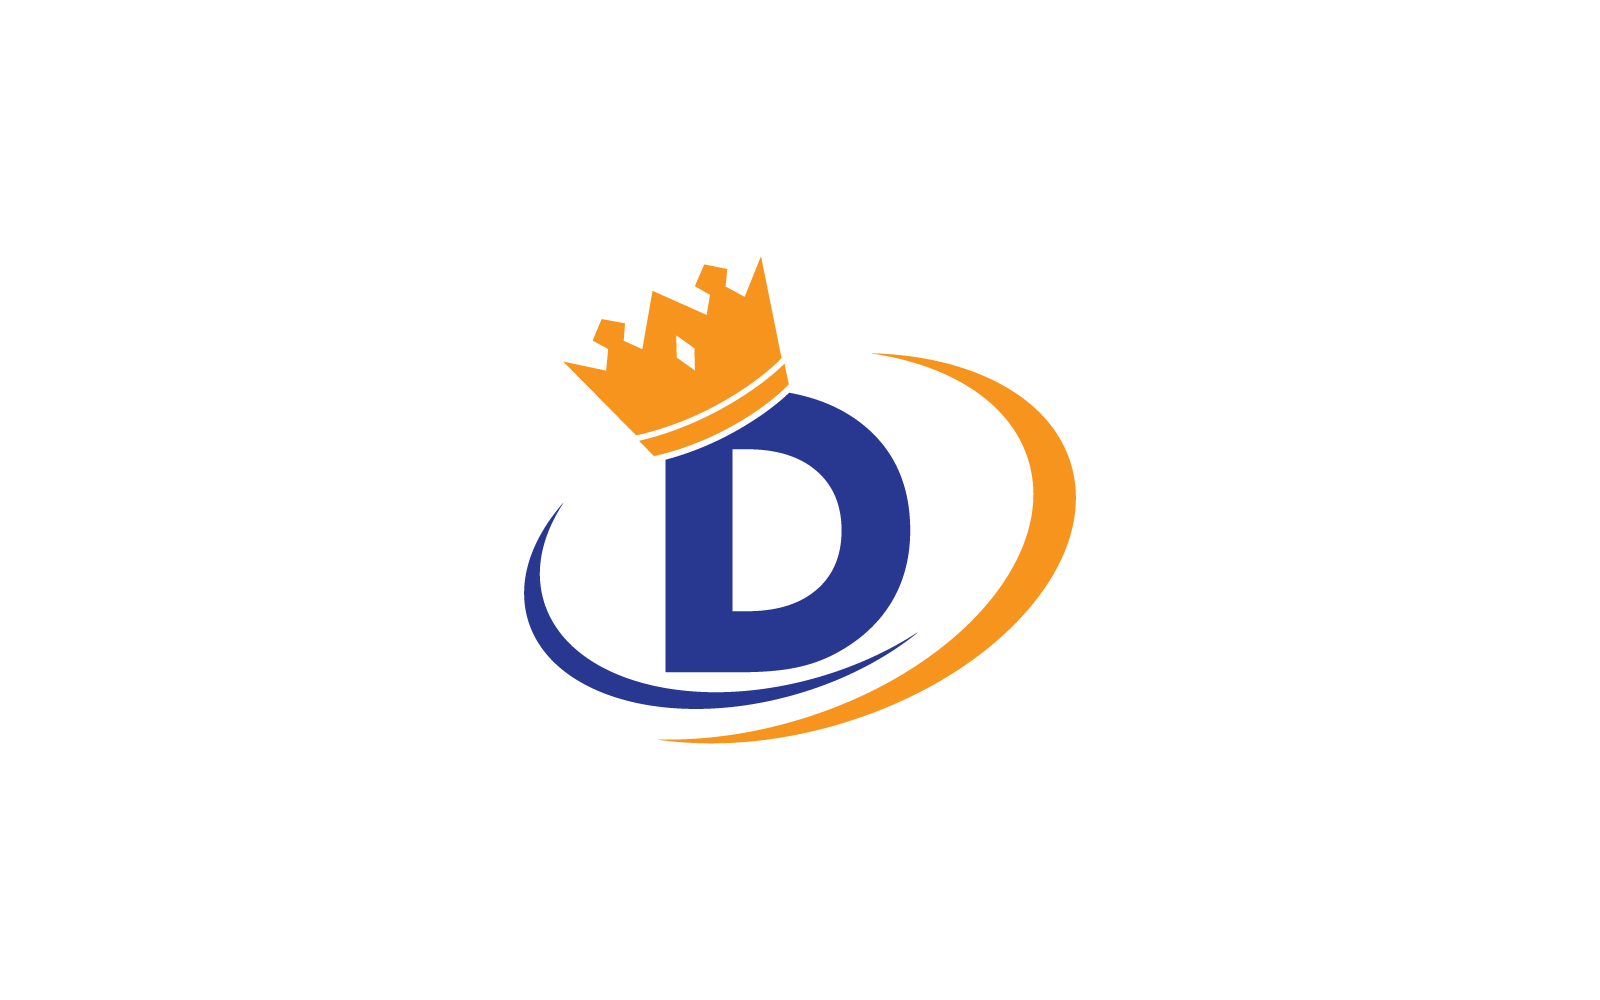 Crown with D initial letter illustration logo template vector design